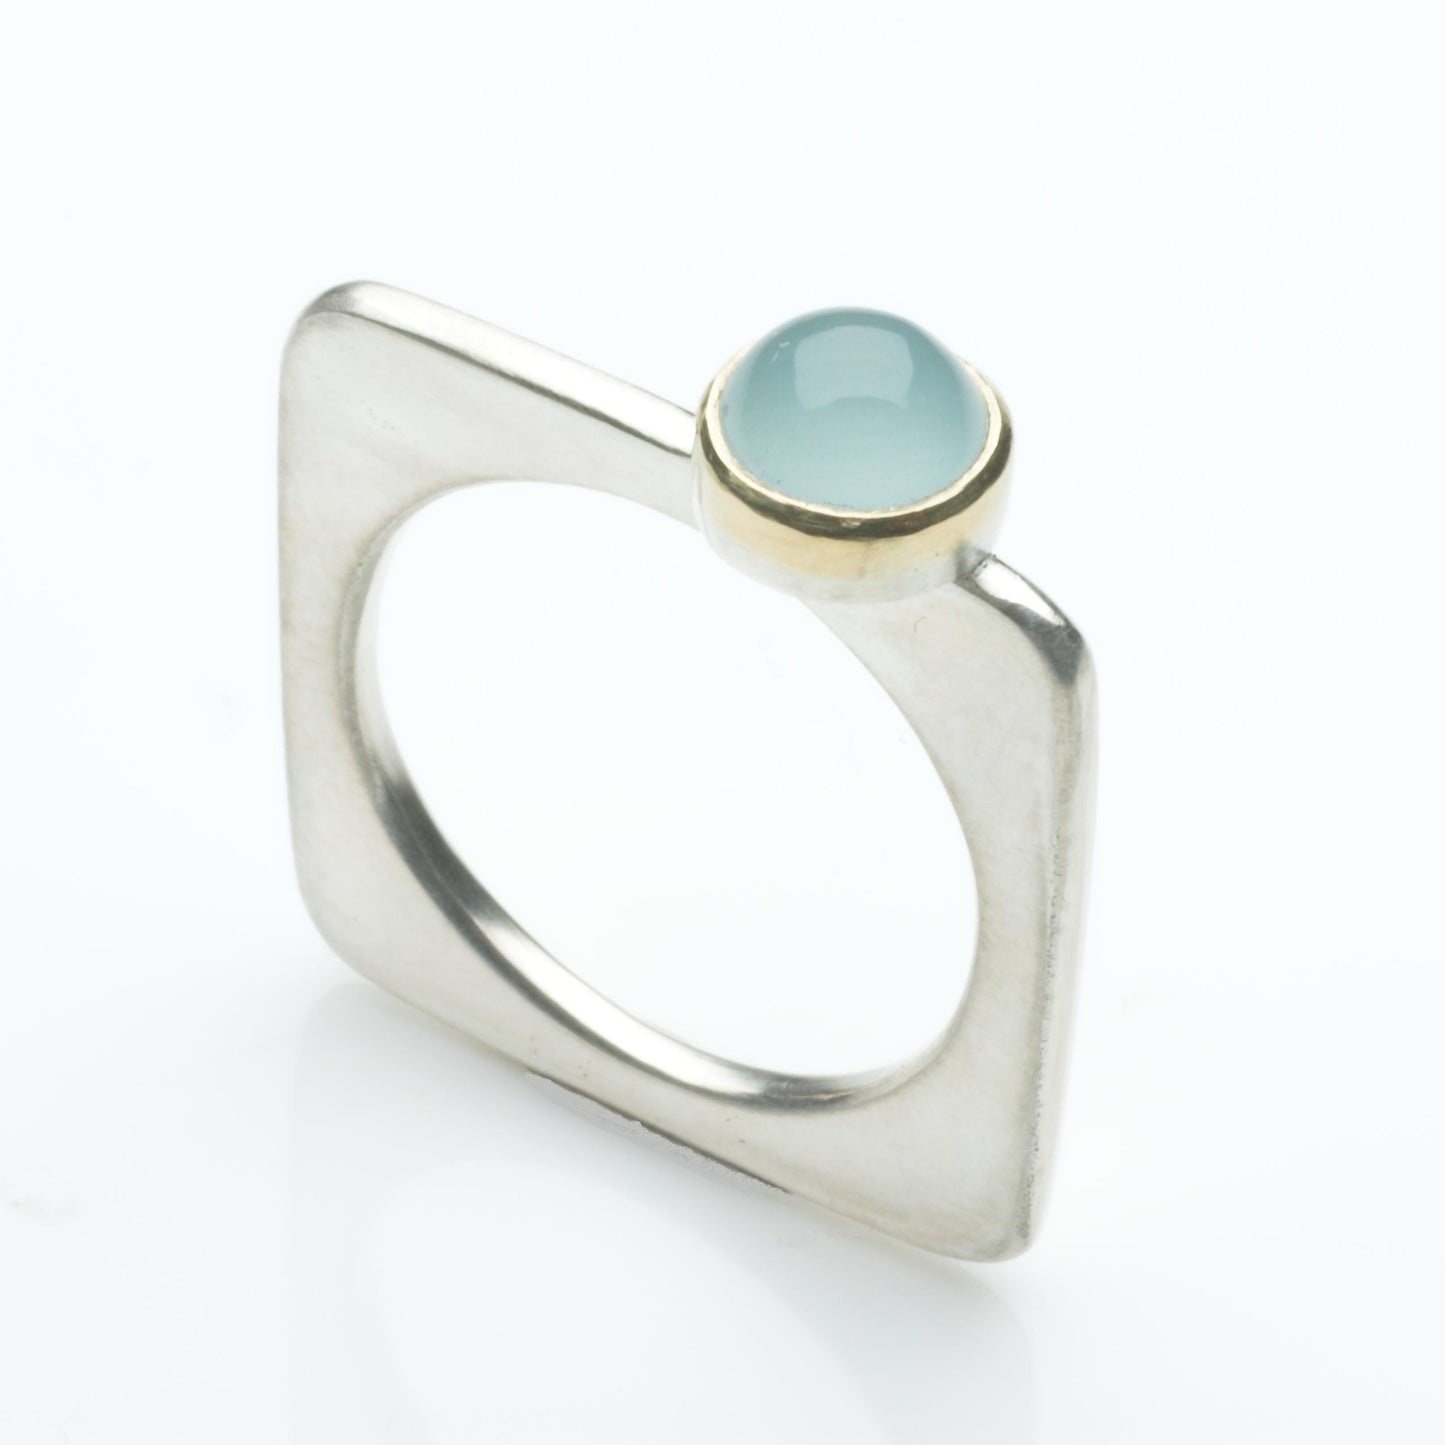 Square silver ring with 6mm aquamarine